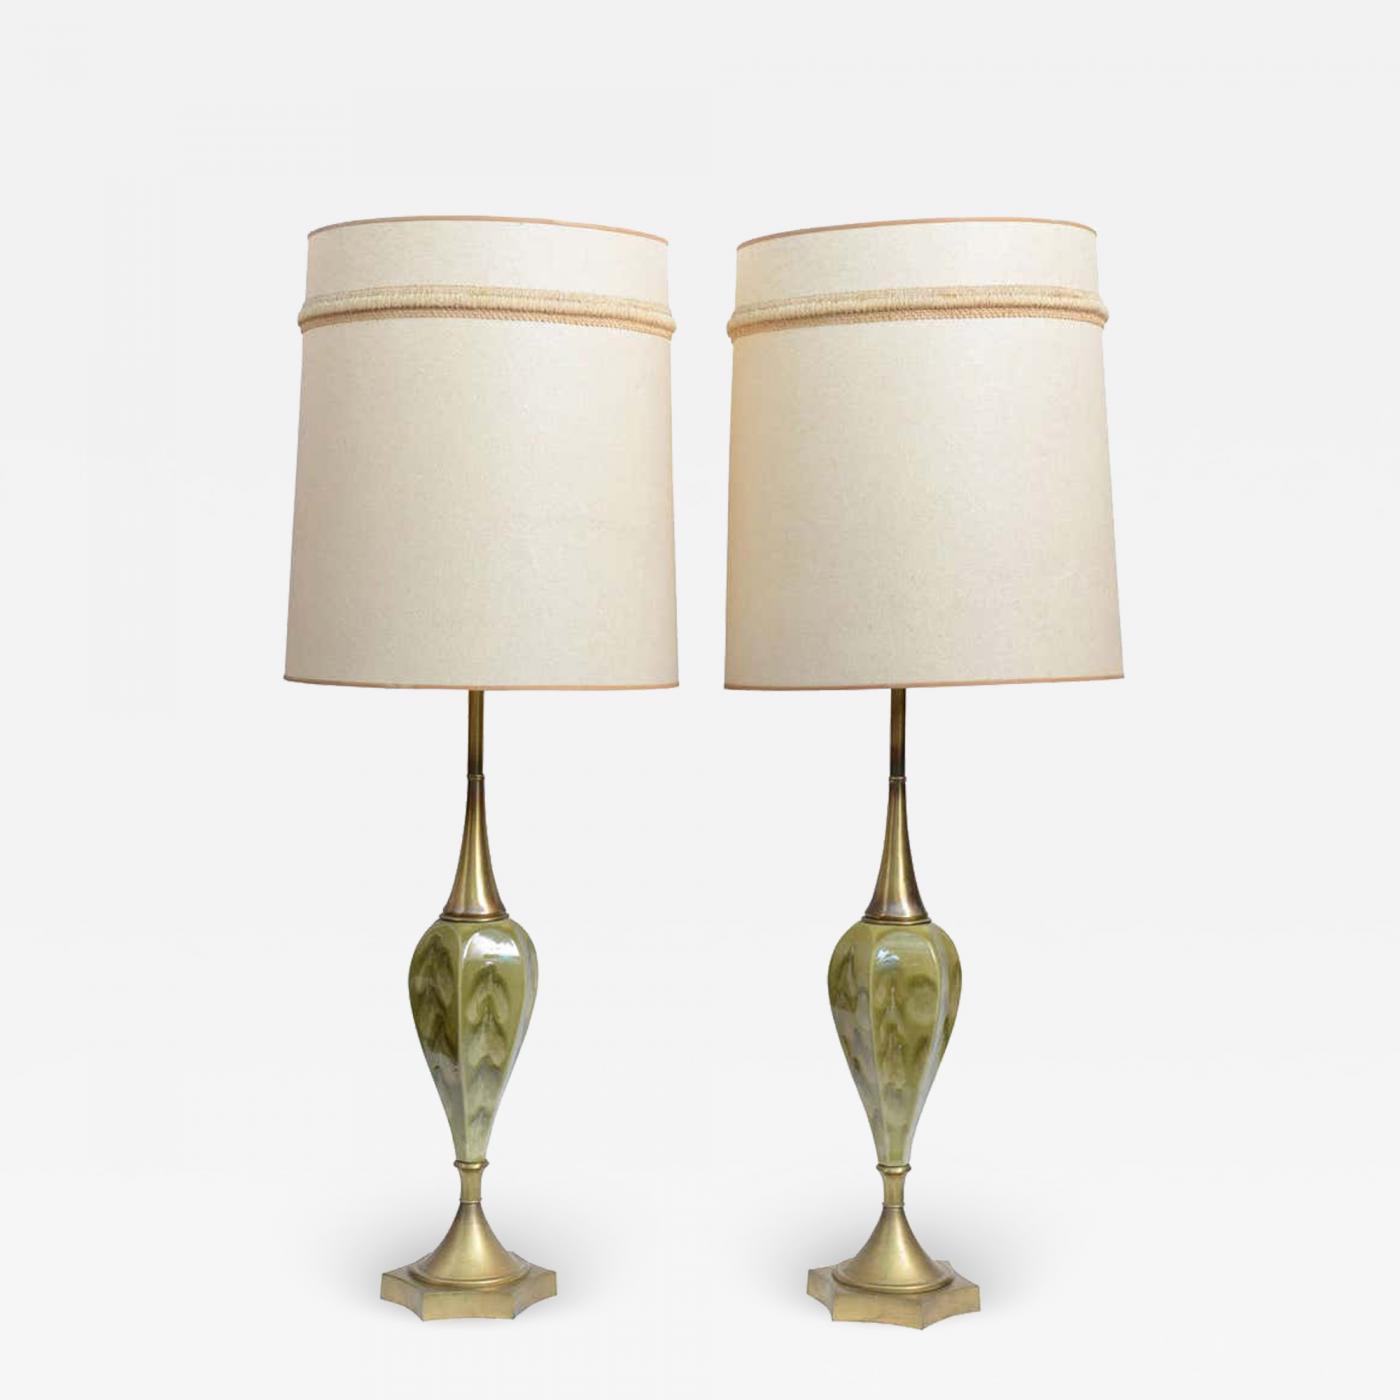 https://cdn.incollect.com/sites/default/files/zoom/Rembrandt-Lamp-Company-Green-Pottery-and-Brass-Table-Lamps-by-Rembrandt-Cie-433573-1803927.jpg